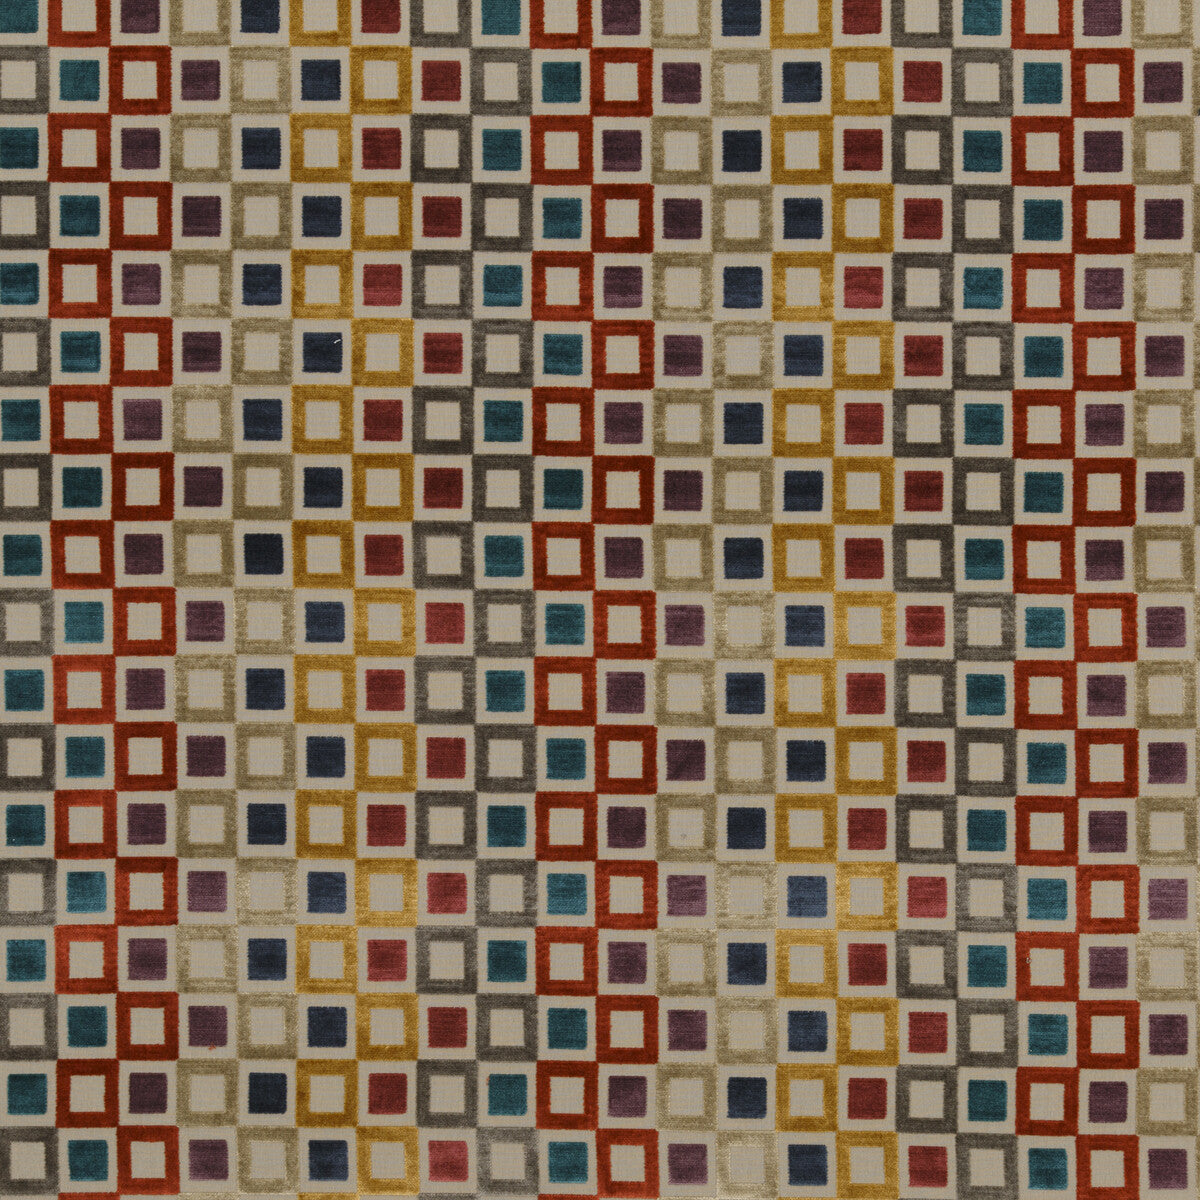 Square Dance fabric in tutti frutti color - pattern PF50425.1.0 - by Baker Lifestyle in the Carnival collection